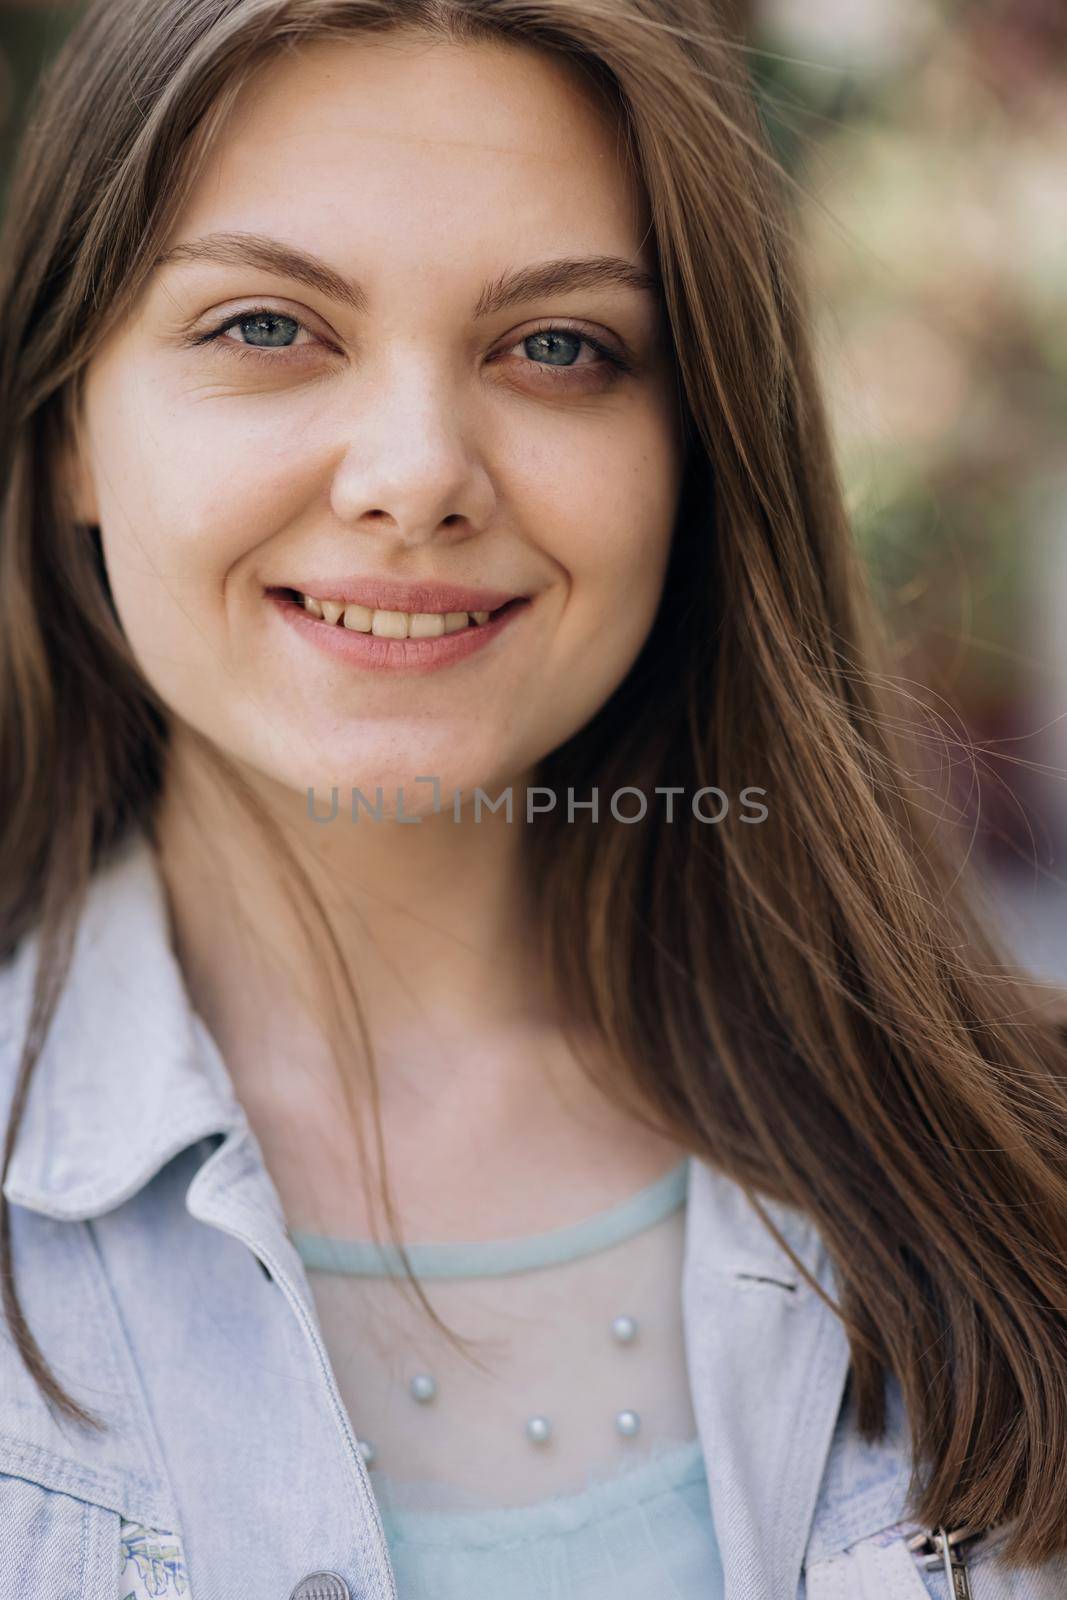 Vertical Screen Beautiful Female with creative vivid makeup and pink lipstick on lips and hairstyle posing outside happy looking at camera. Close up portrait Smiling attractive young adult woman